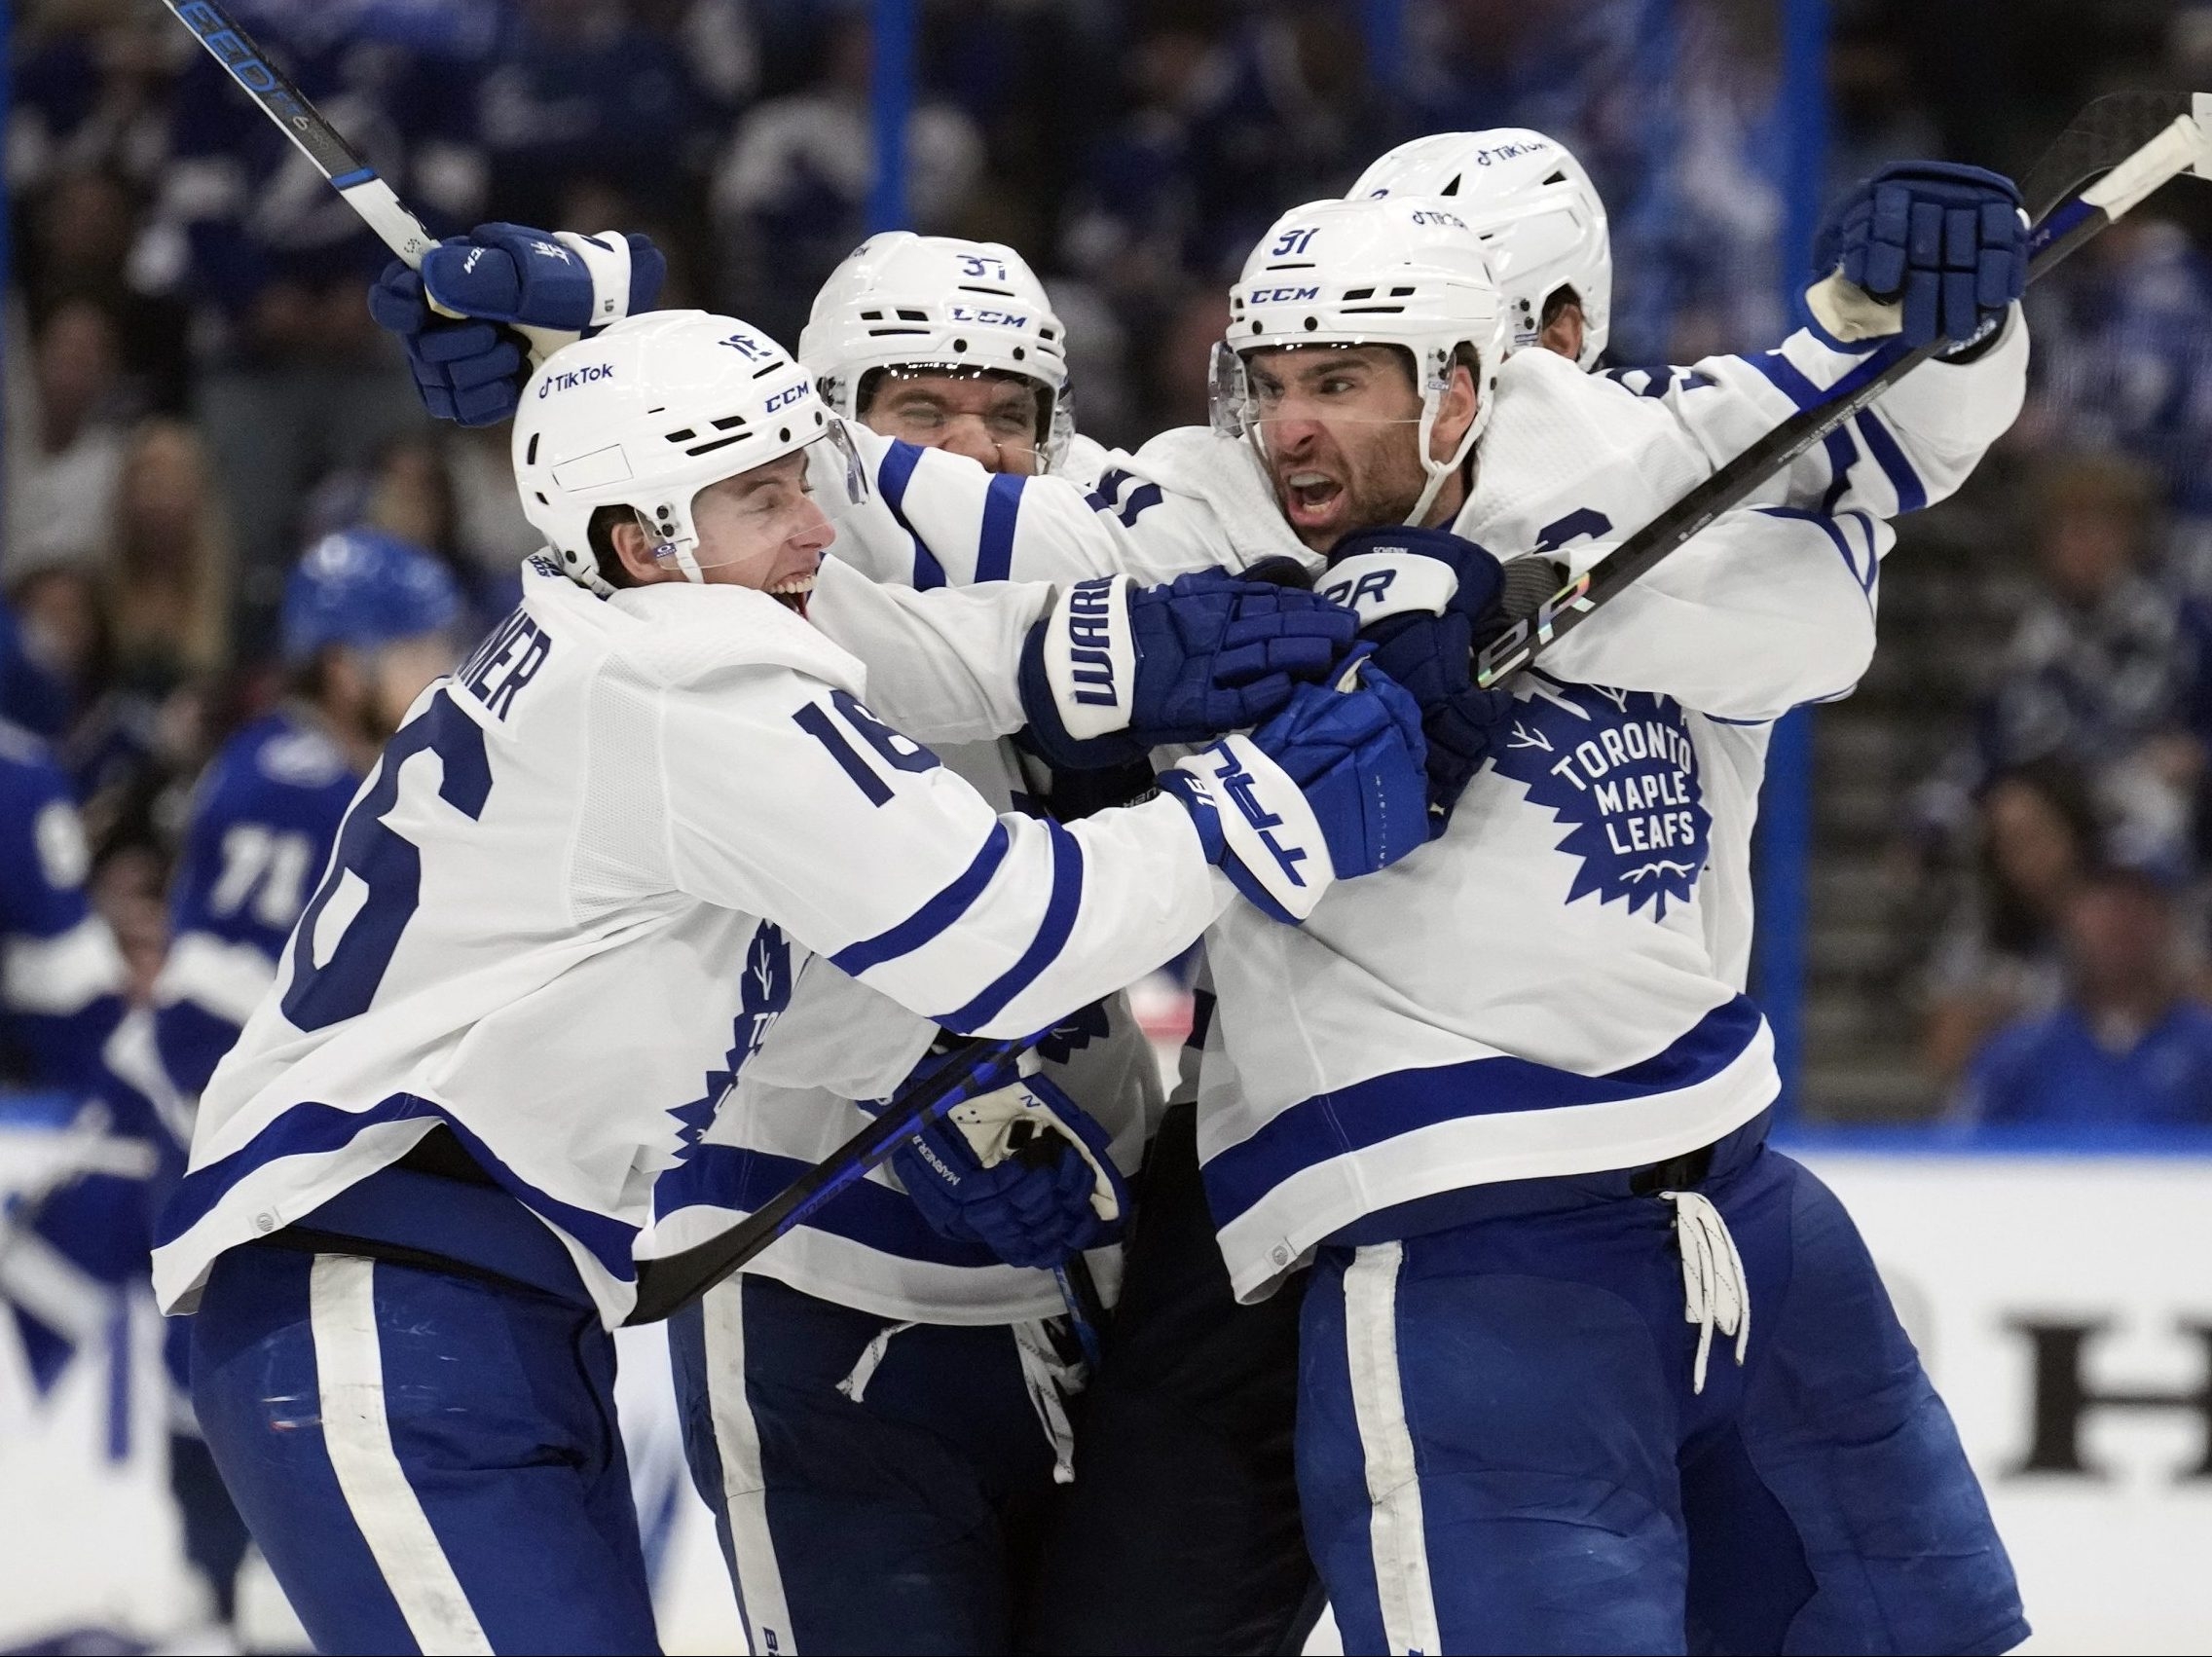 Toronto Maple Leafs In a Great Position at the All-Star Break